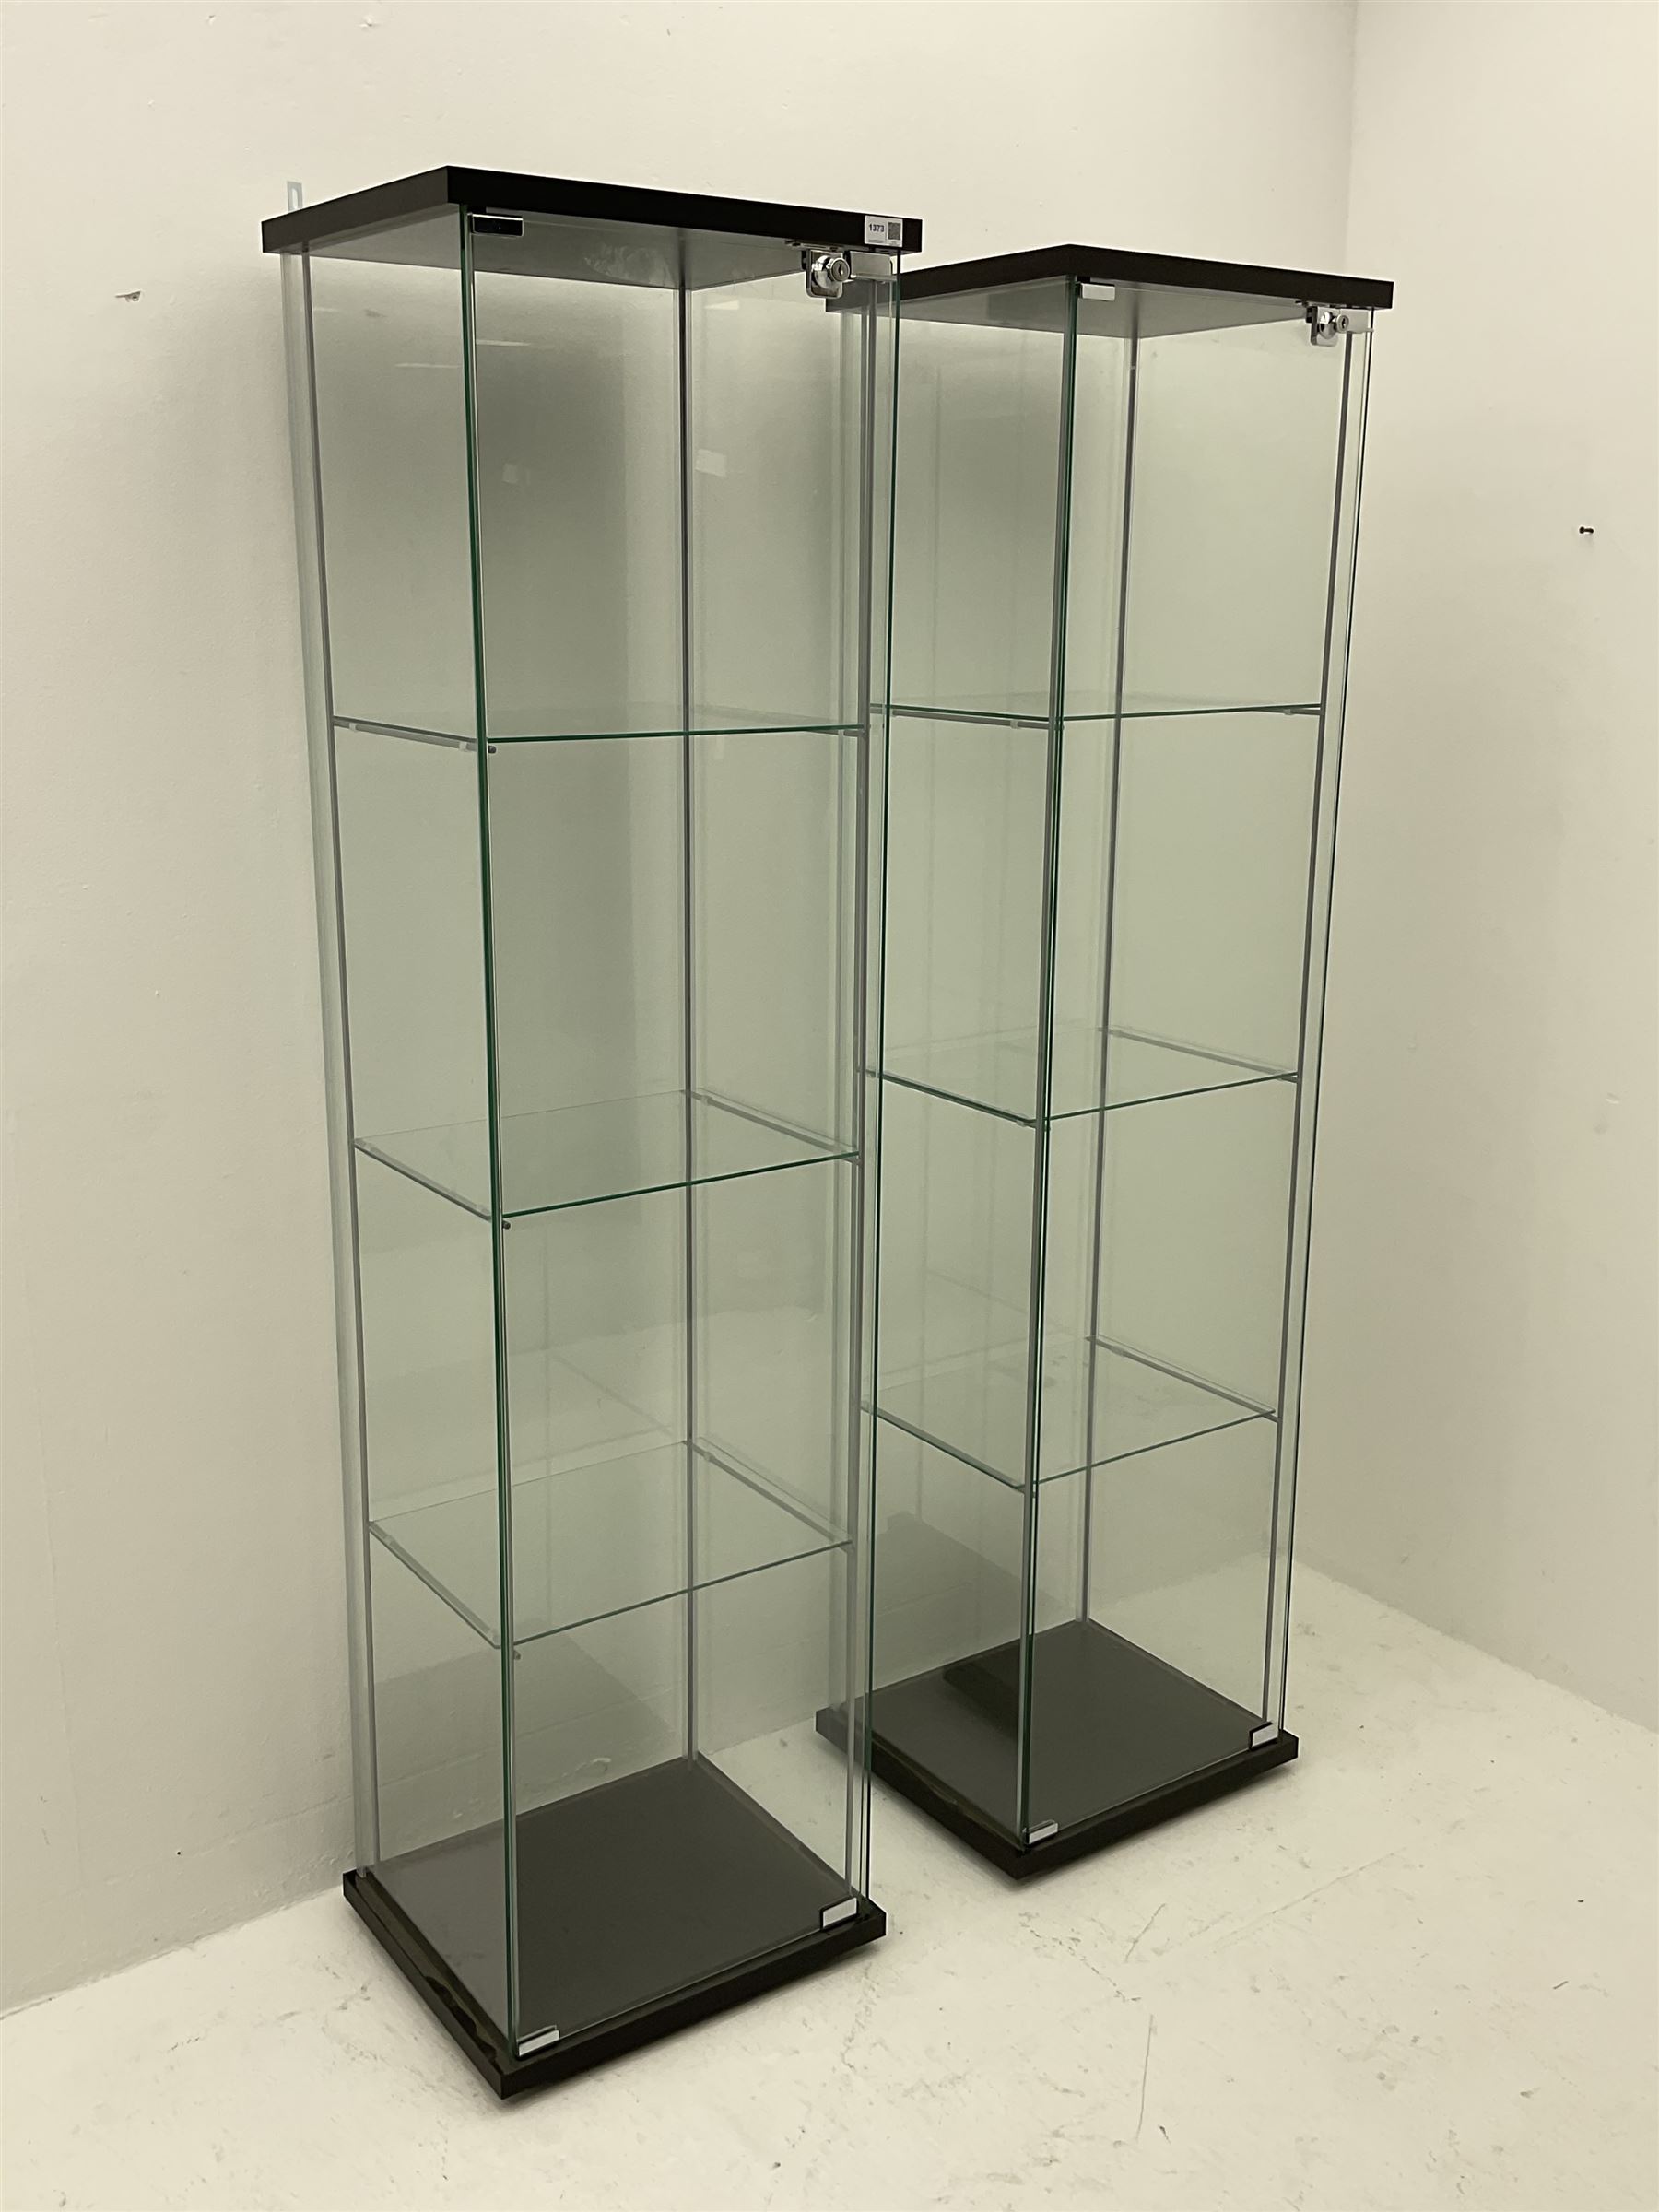 Pair of floor-standing four sided glass display cabinet - Image 2 of 2